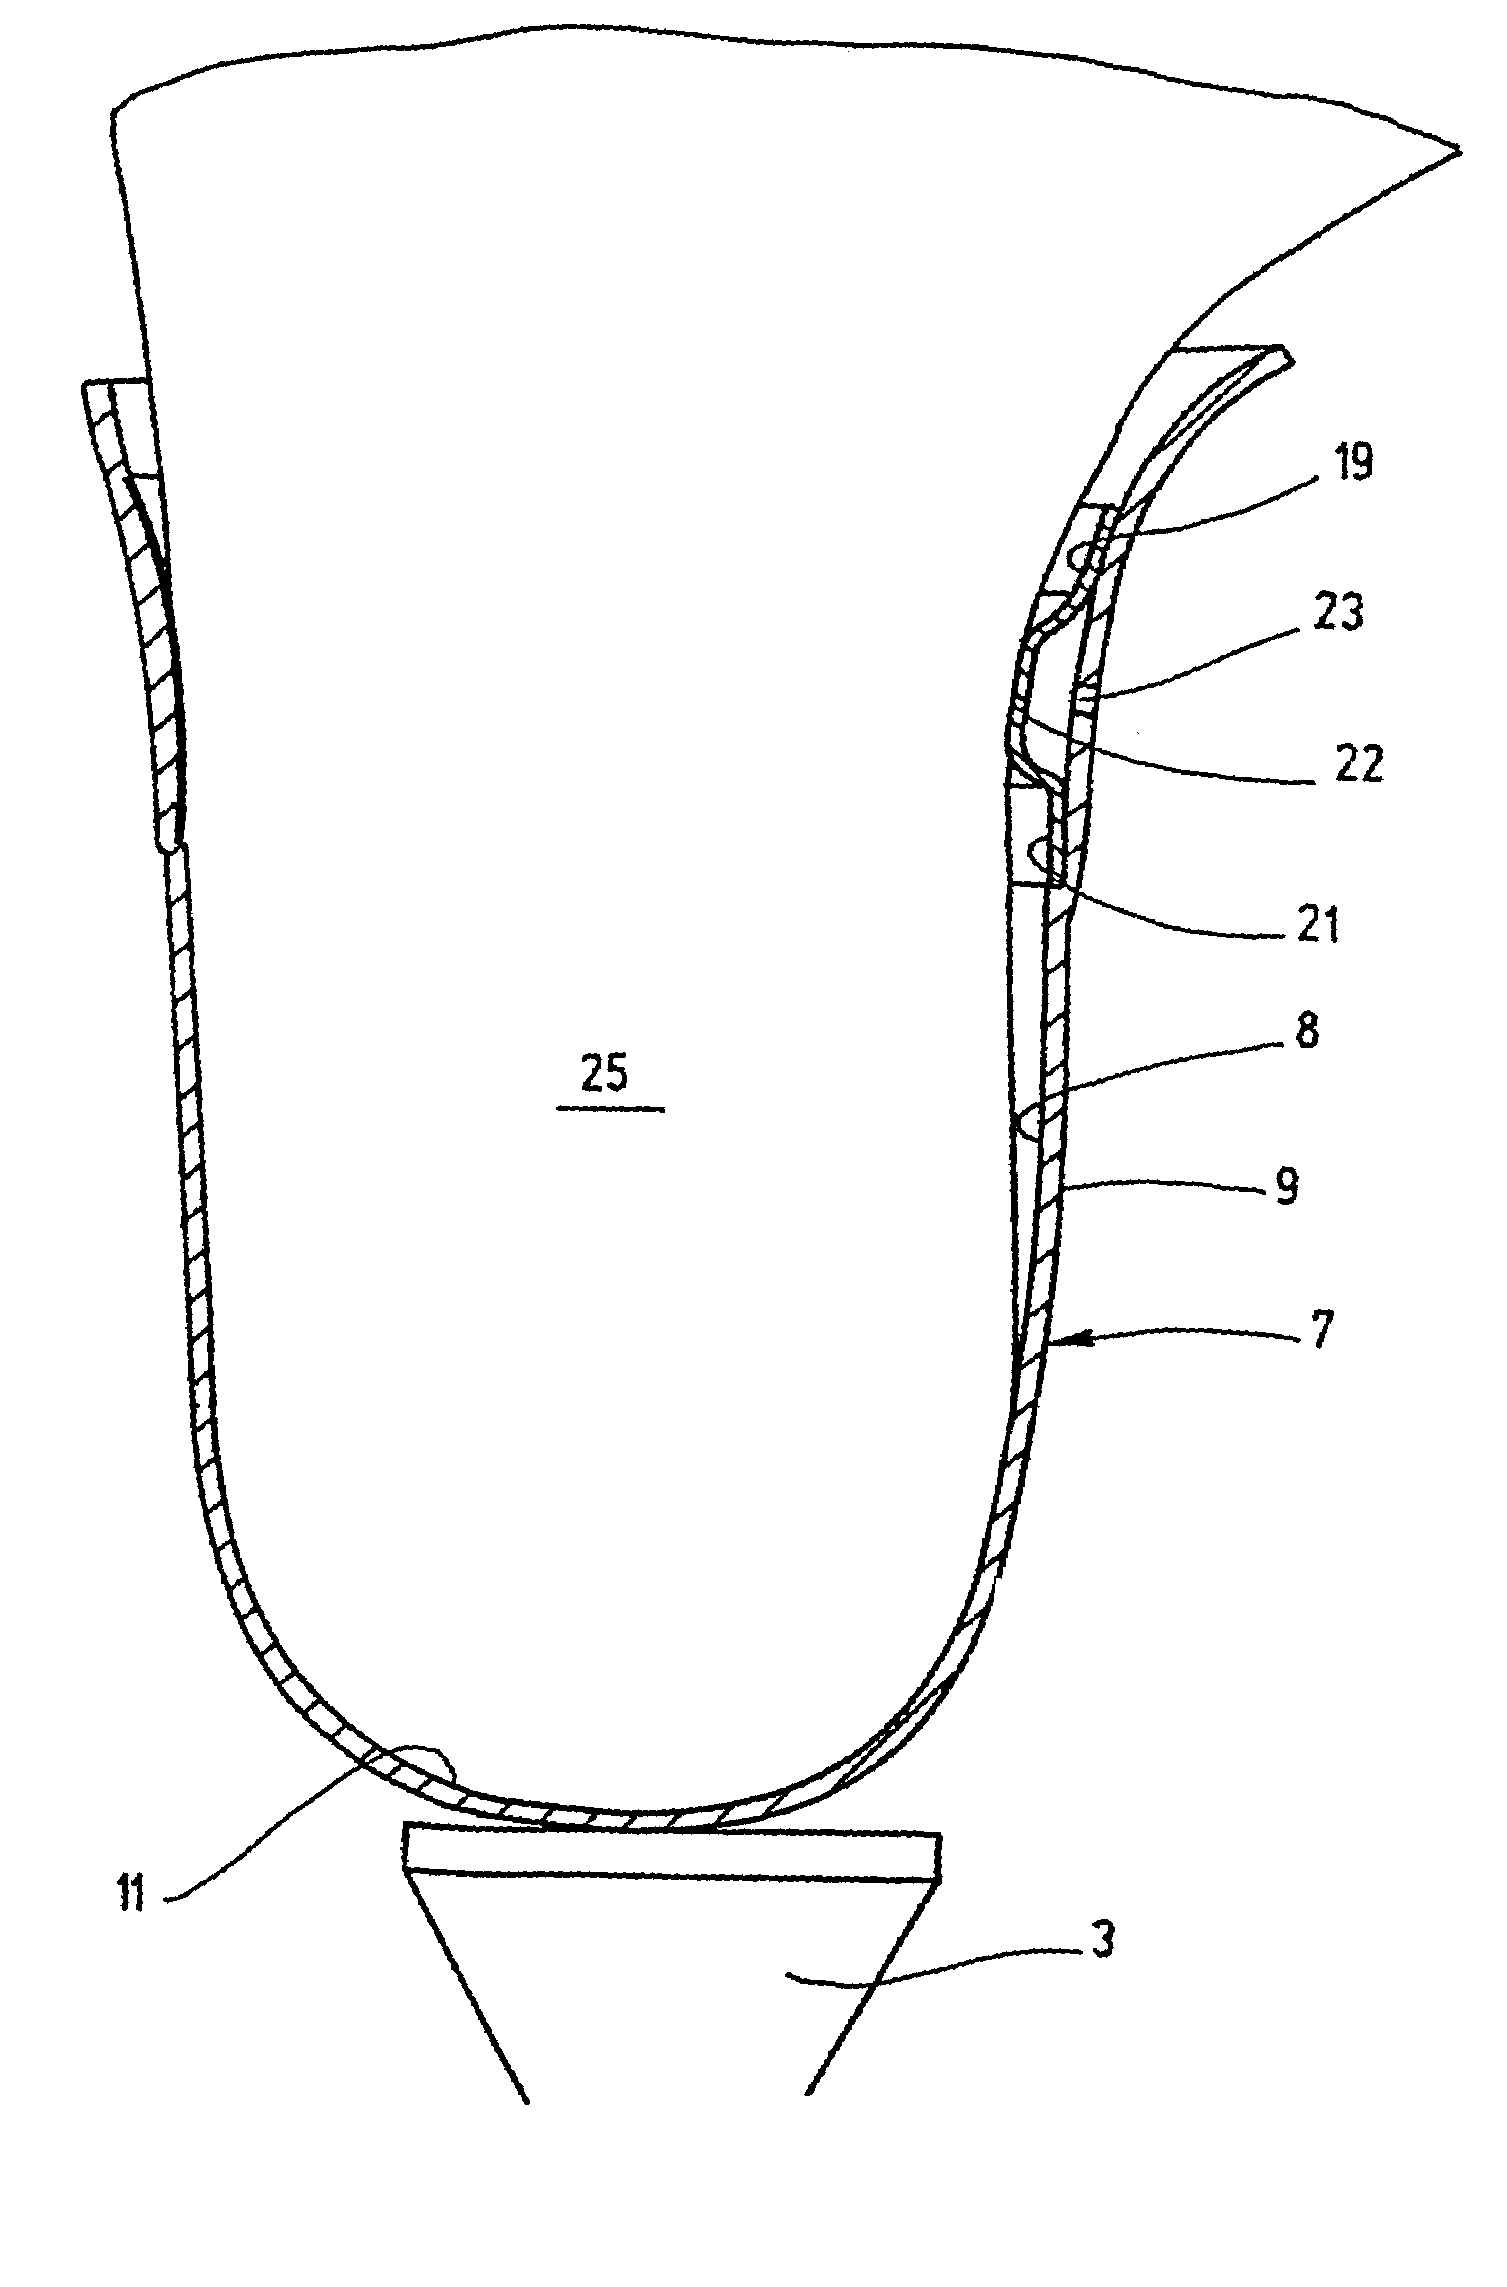 Sealing sleeve for sealing residual limb in a prosthetic socket